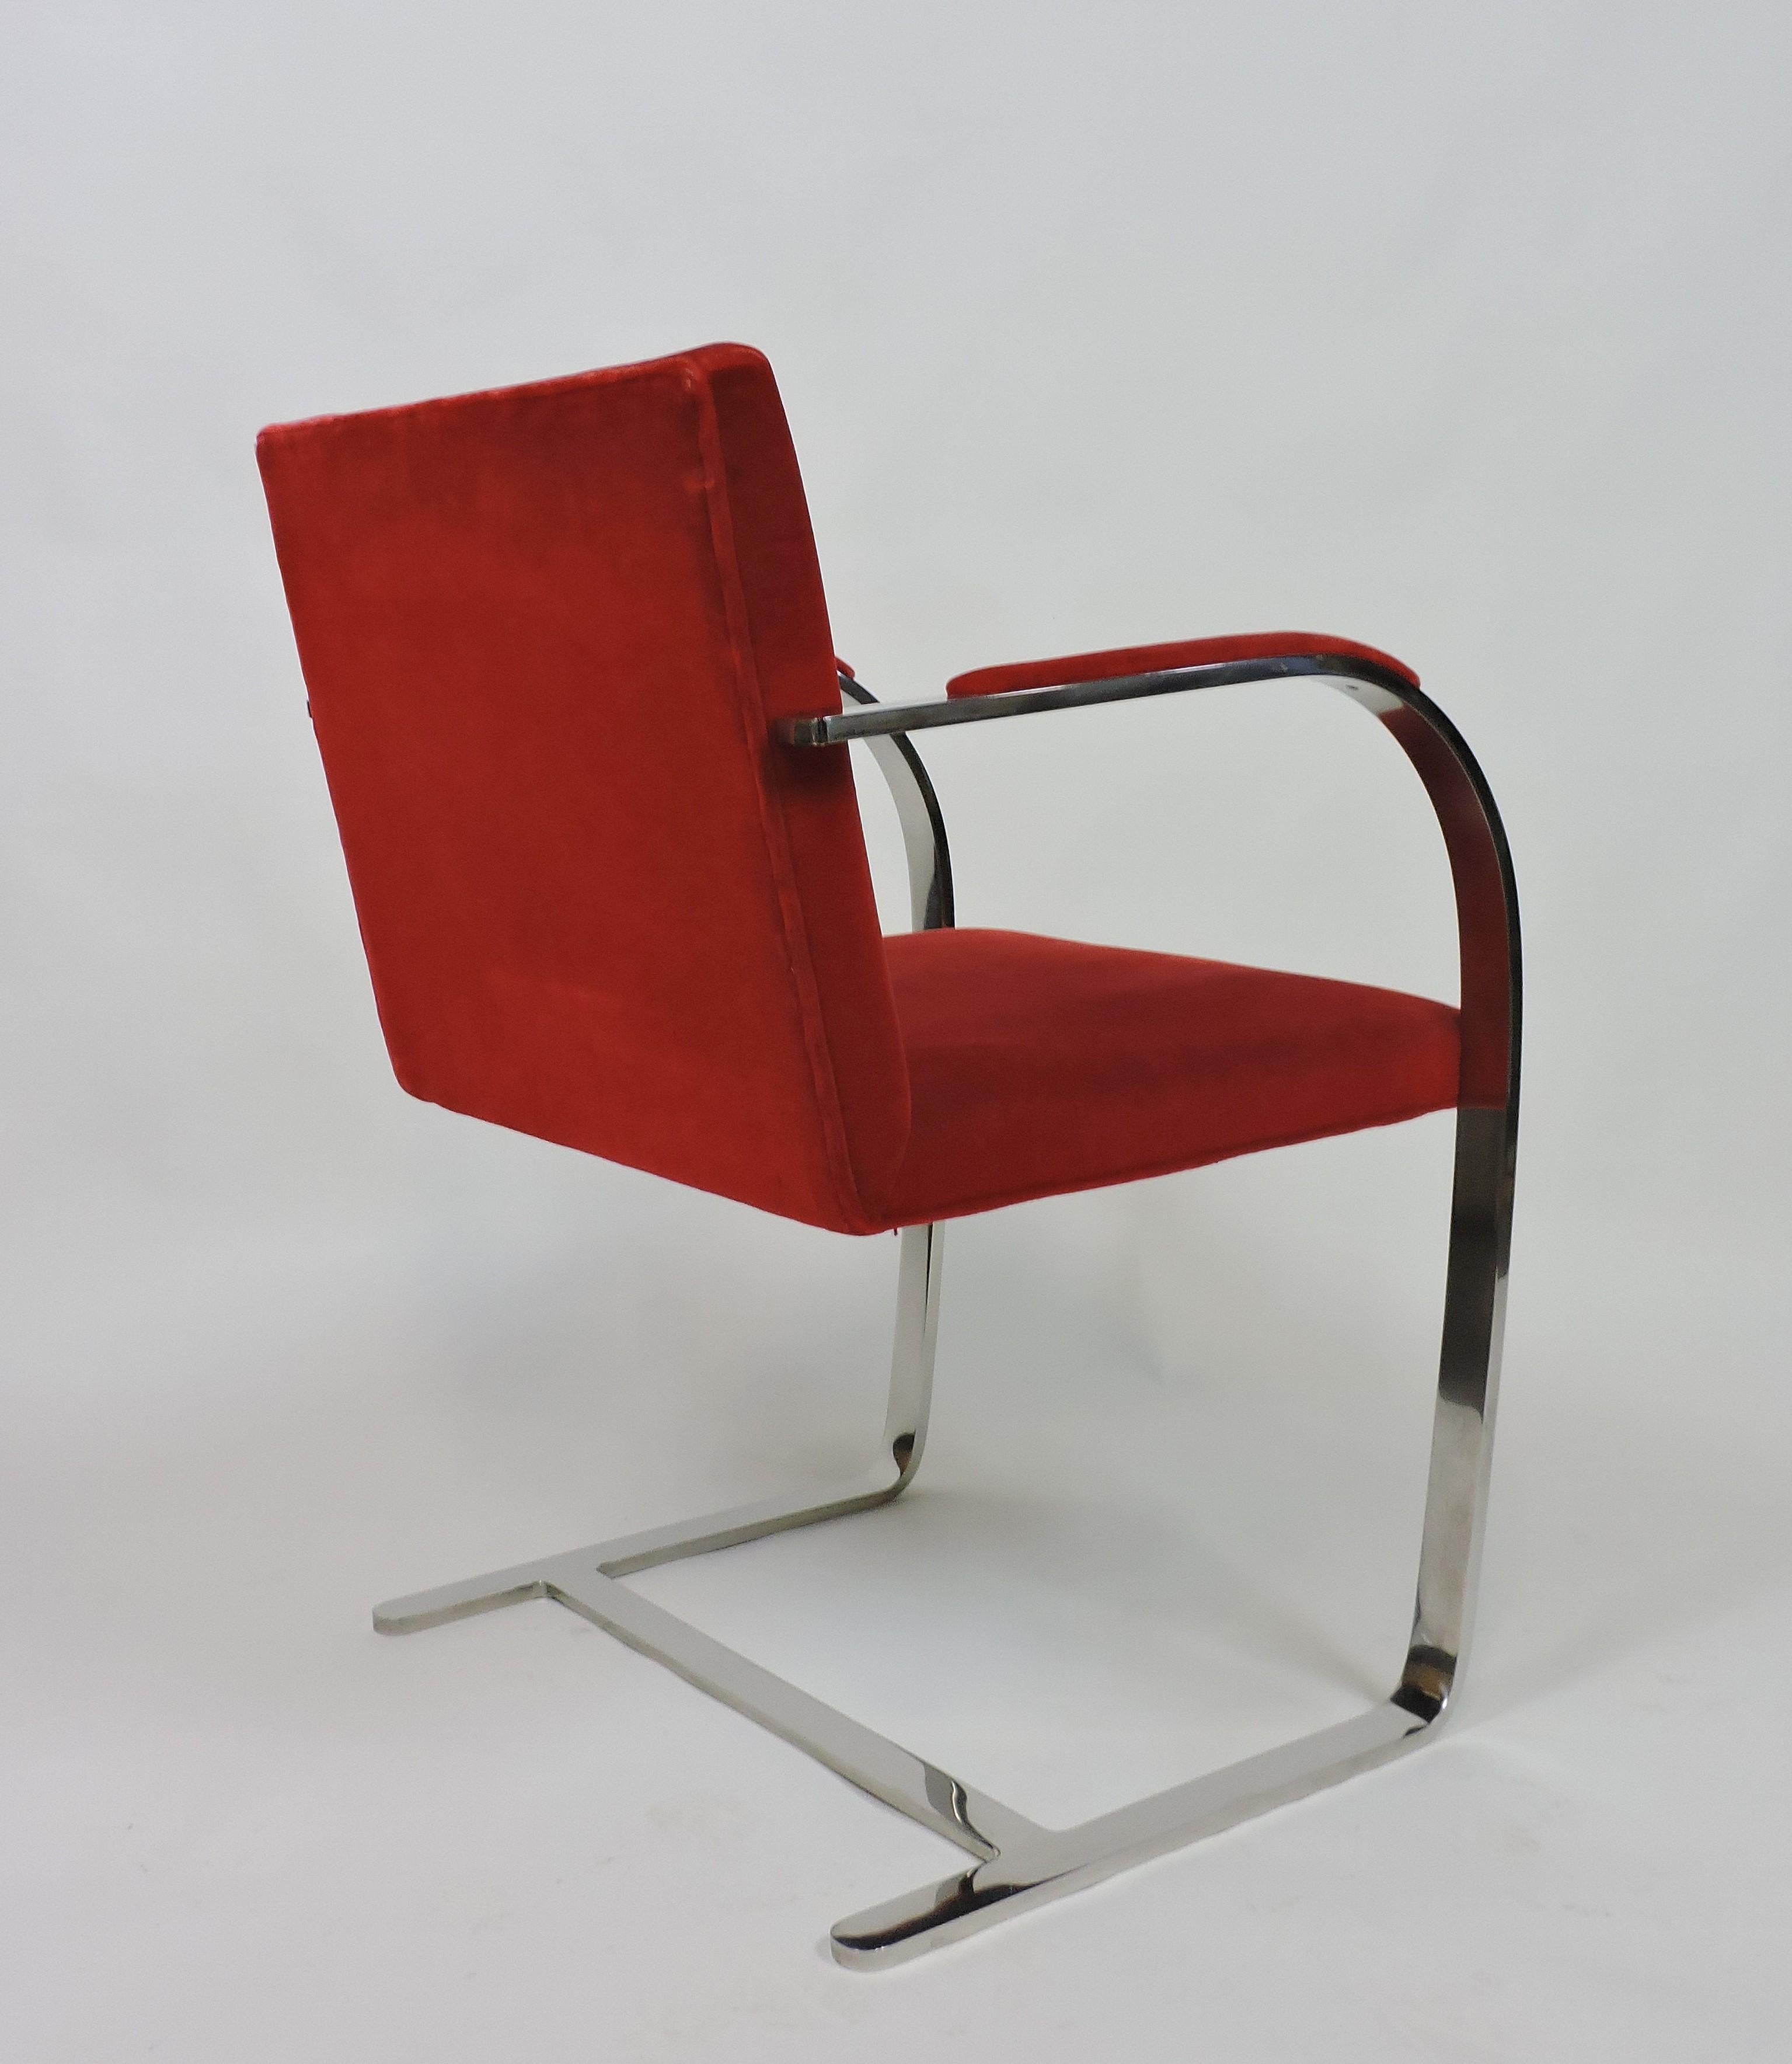 Mid-Century Modern Mies van der Rohe for Knoll Brno Flat Bar Stainless Steel Chair